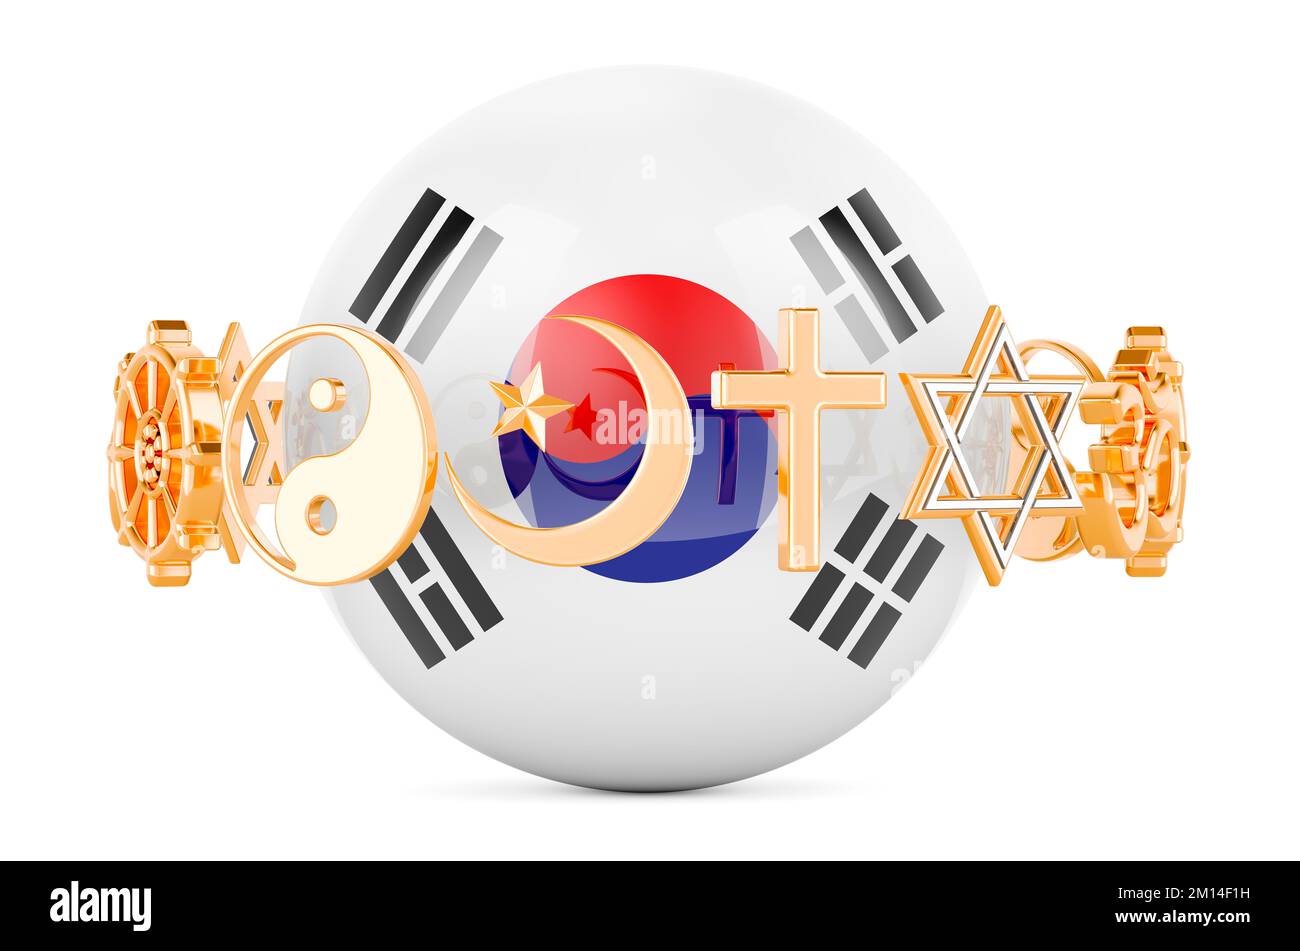 South Korean flag painted on sphere with religions symbols around, 3D rendering isolated on white background Stock Photo